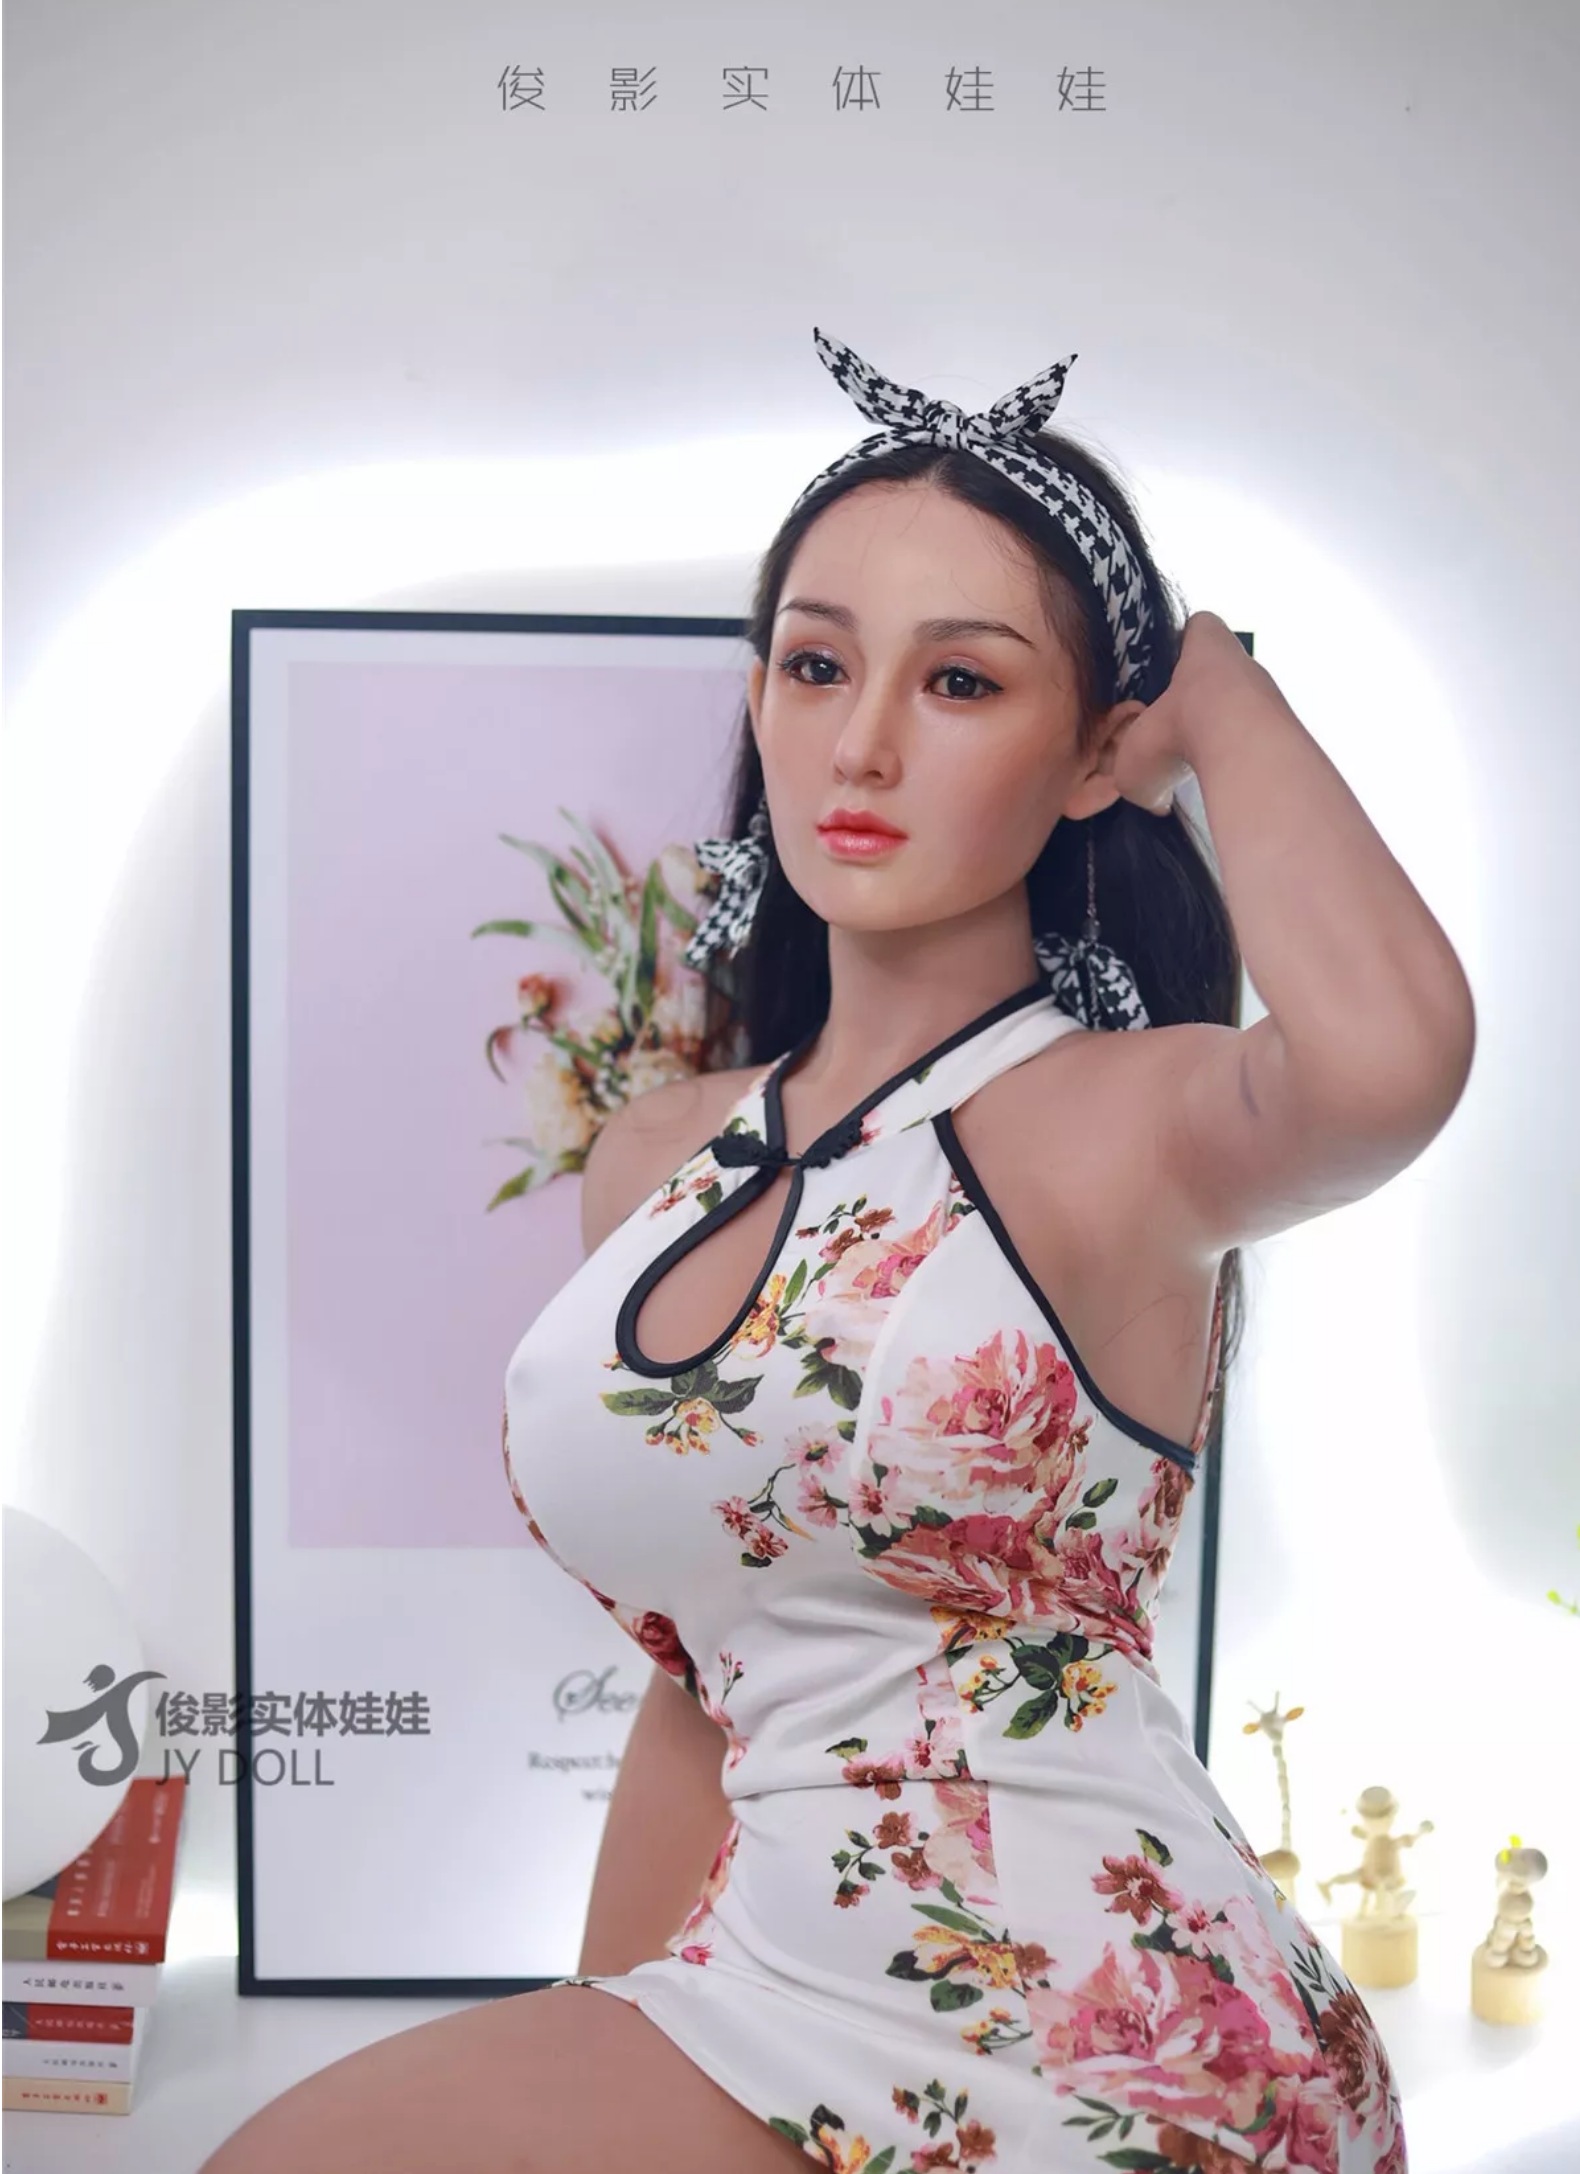 JY Doll 166 cm Fusion - ZhaoMin | Buy Sex Dolls at DOLLS ACTUALLY